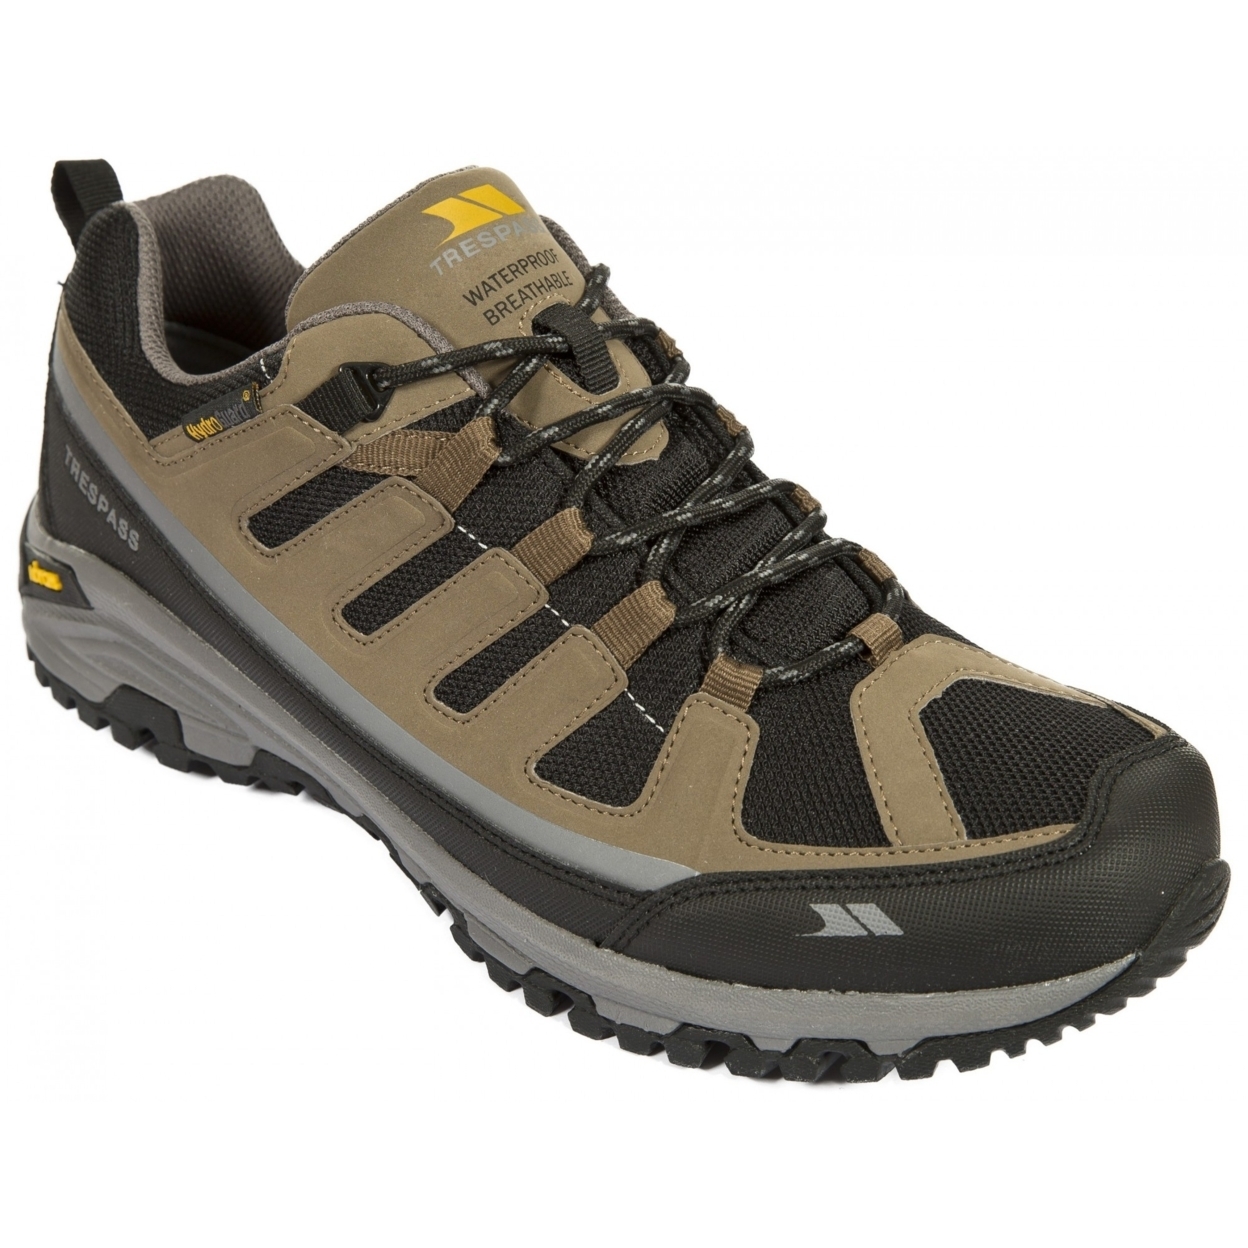 Trespass Mens Cardrona Low Cut Hiking Sneakers/Trainers | eBay